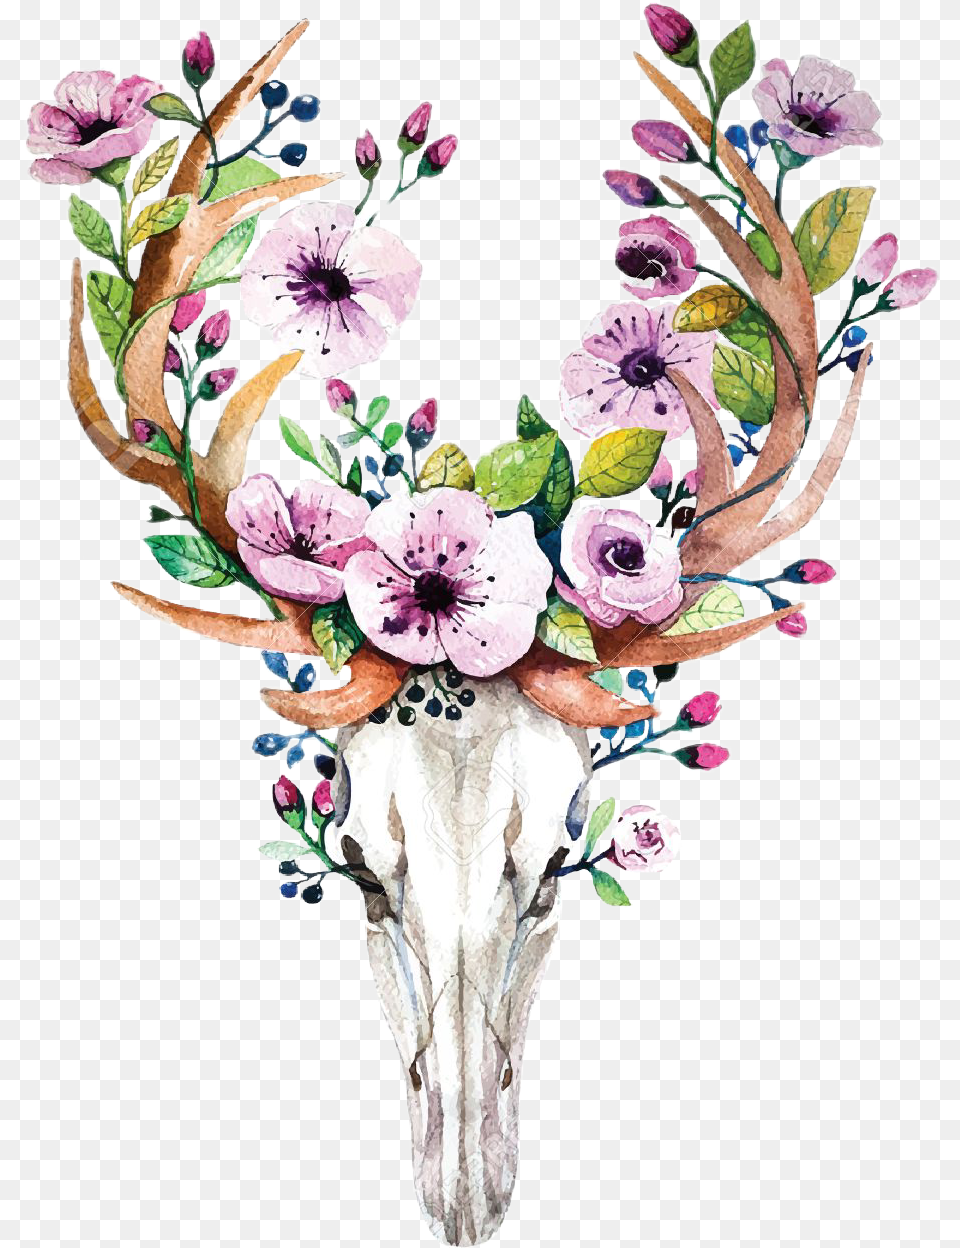 Report Abuse Deer Head With Flowers Full Size Watercolor Deer Skull With Flowers, Flower, Flower Arrangement, Plant, Art Free Png